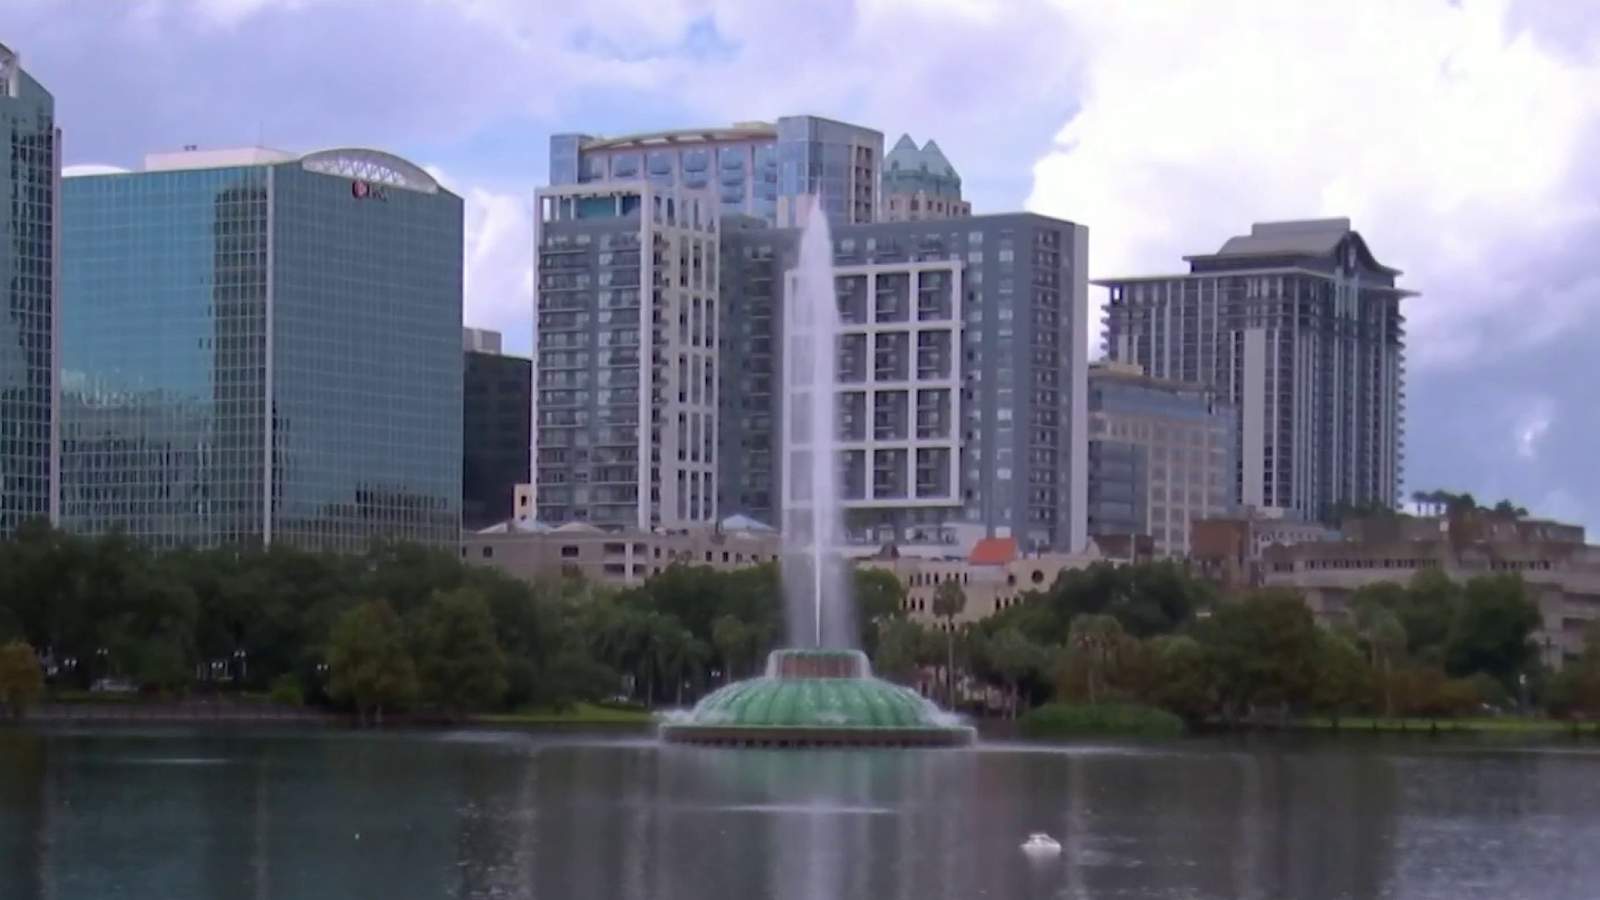 Orlando’s iconic Lake Eola could be getting a facelift